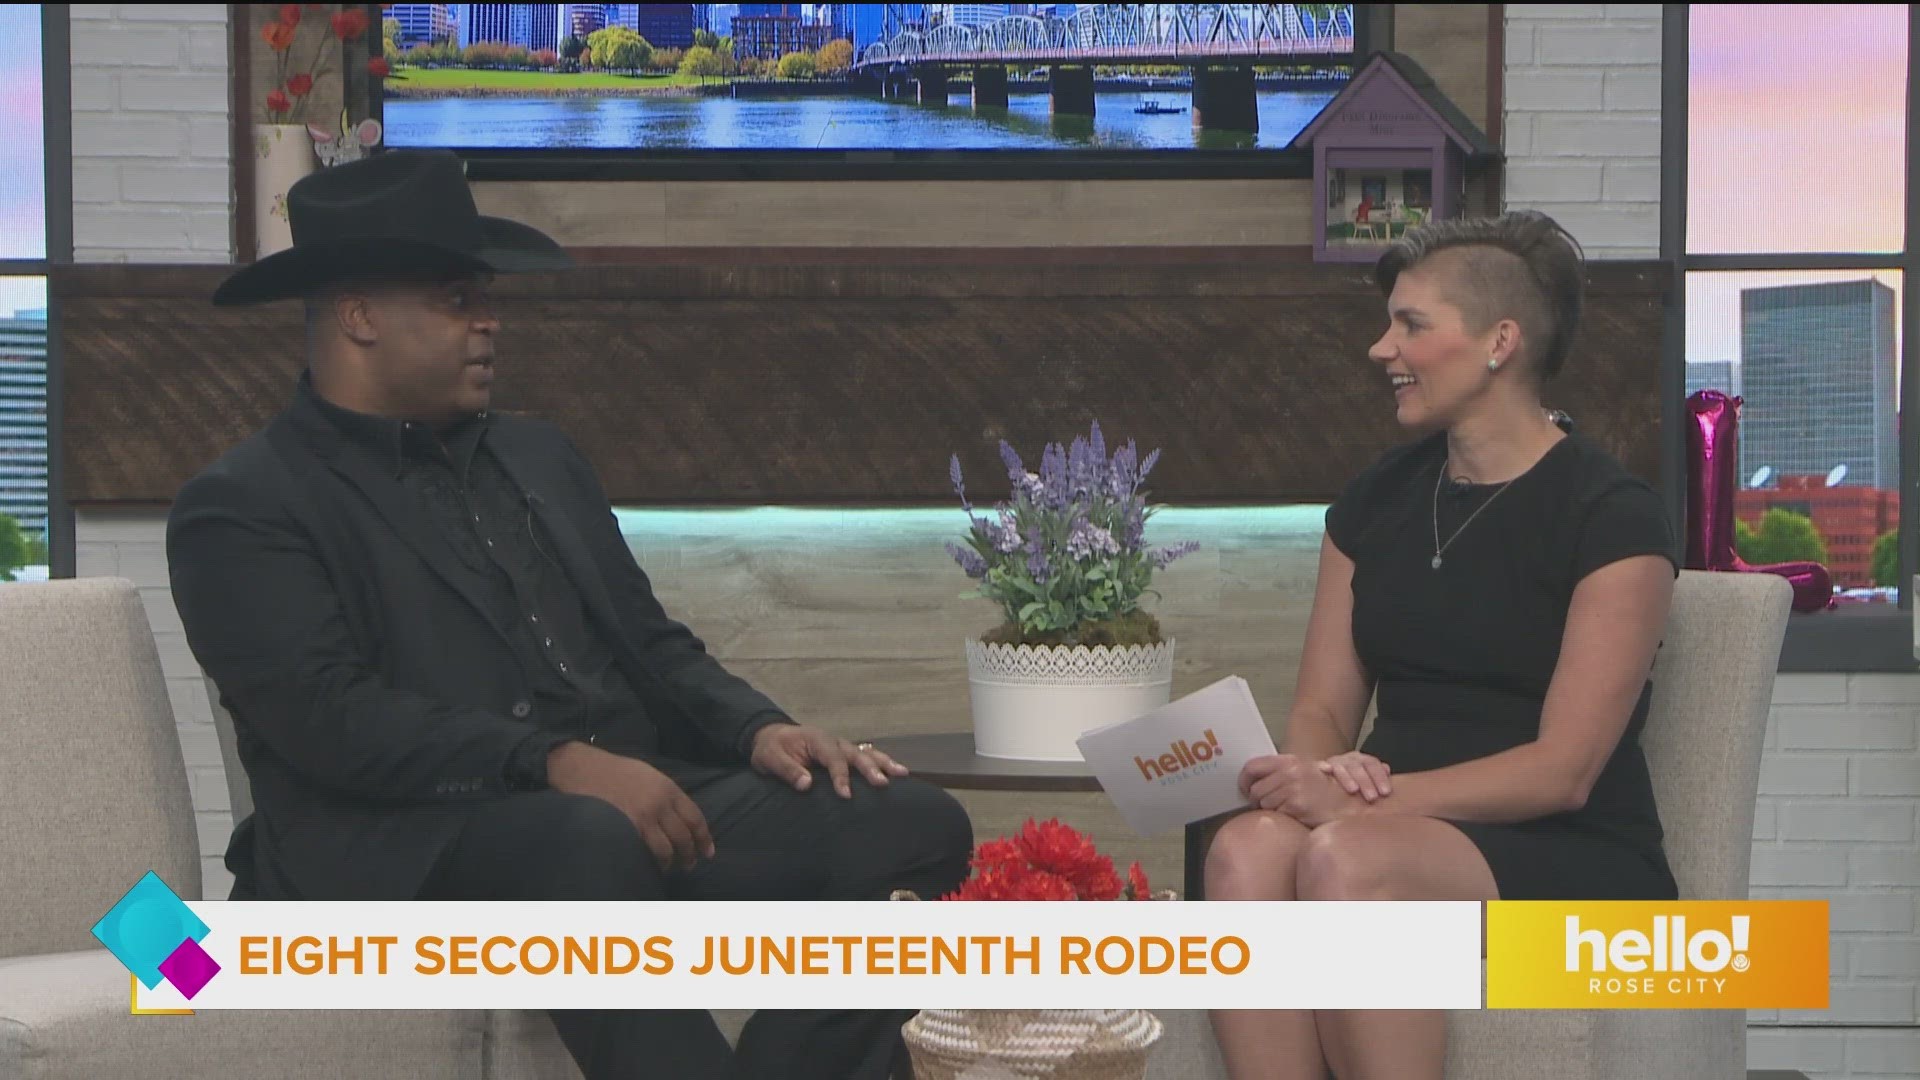 Eight Seconds Juneteenth Rodeo is at the Portland Expo Center June 17